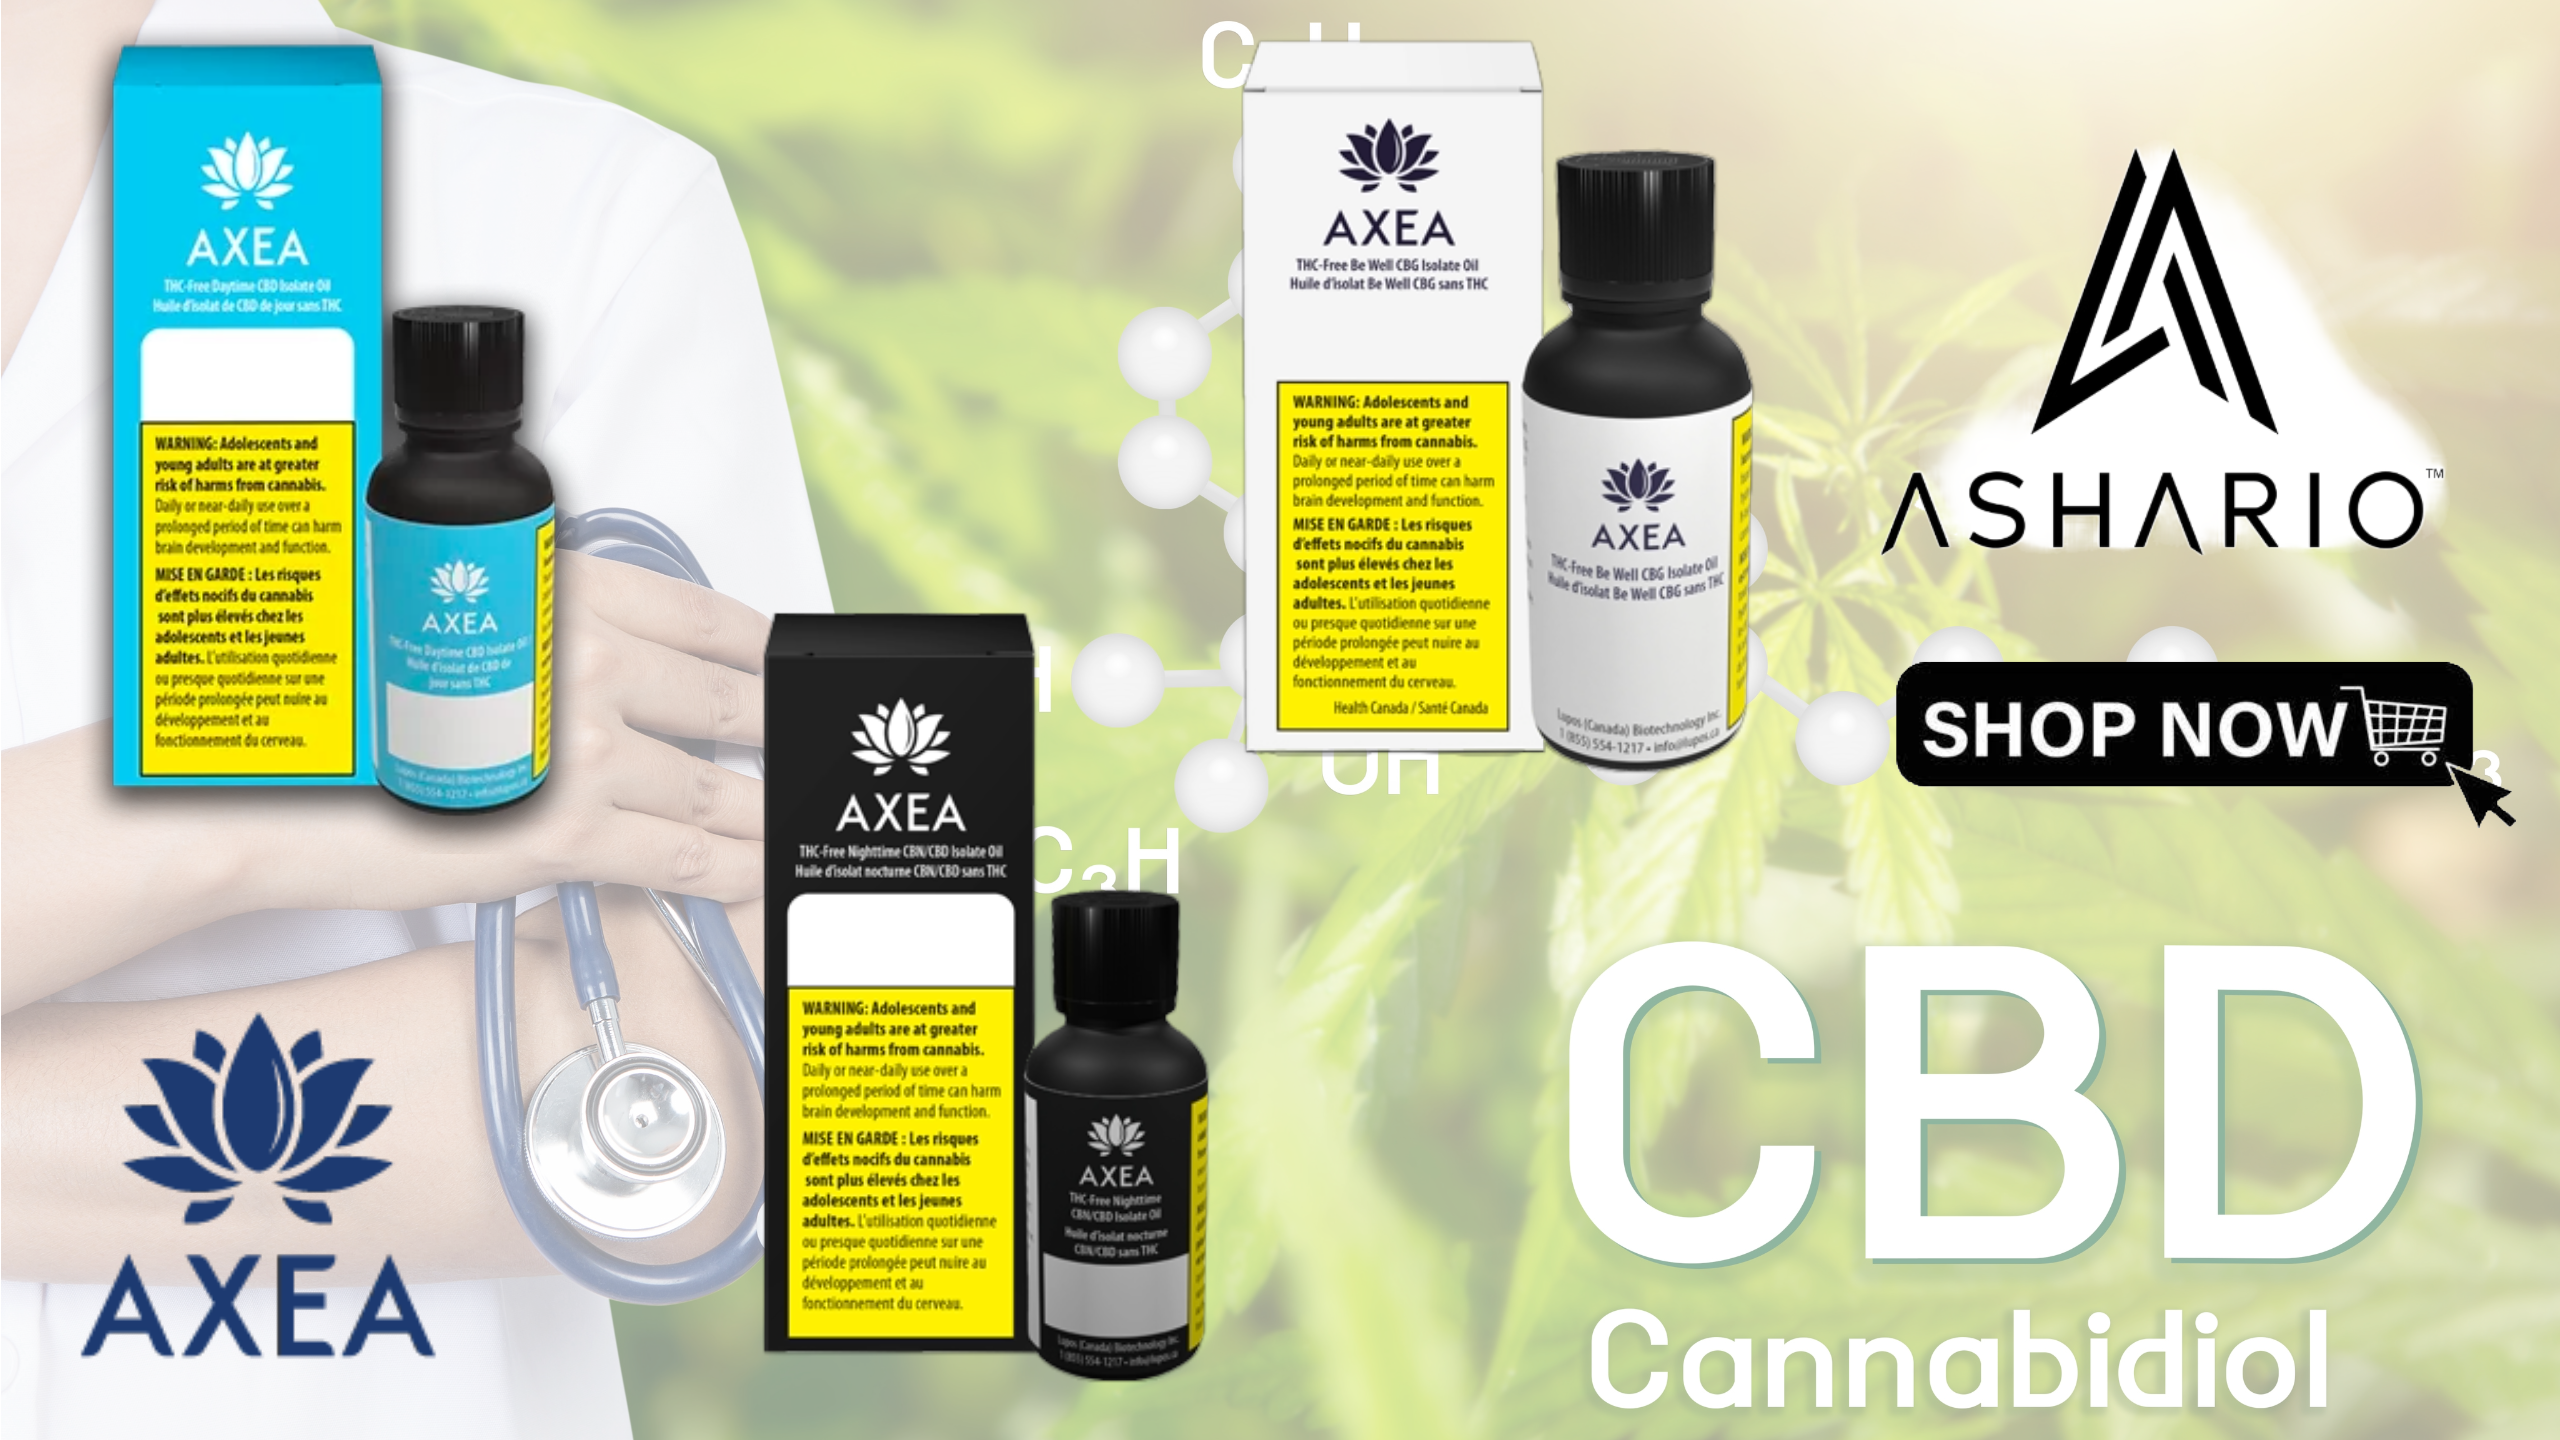 Welcome to AXEA, where a new era of wellness begins with innovative cannabis oil products designed to elevate your everyday life.